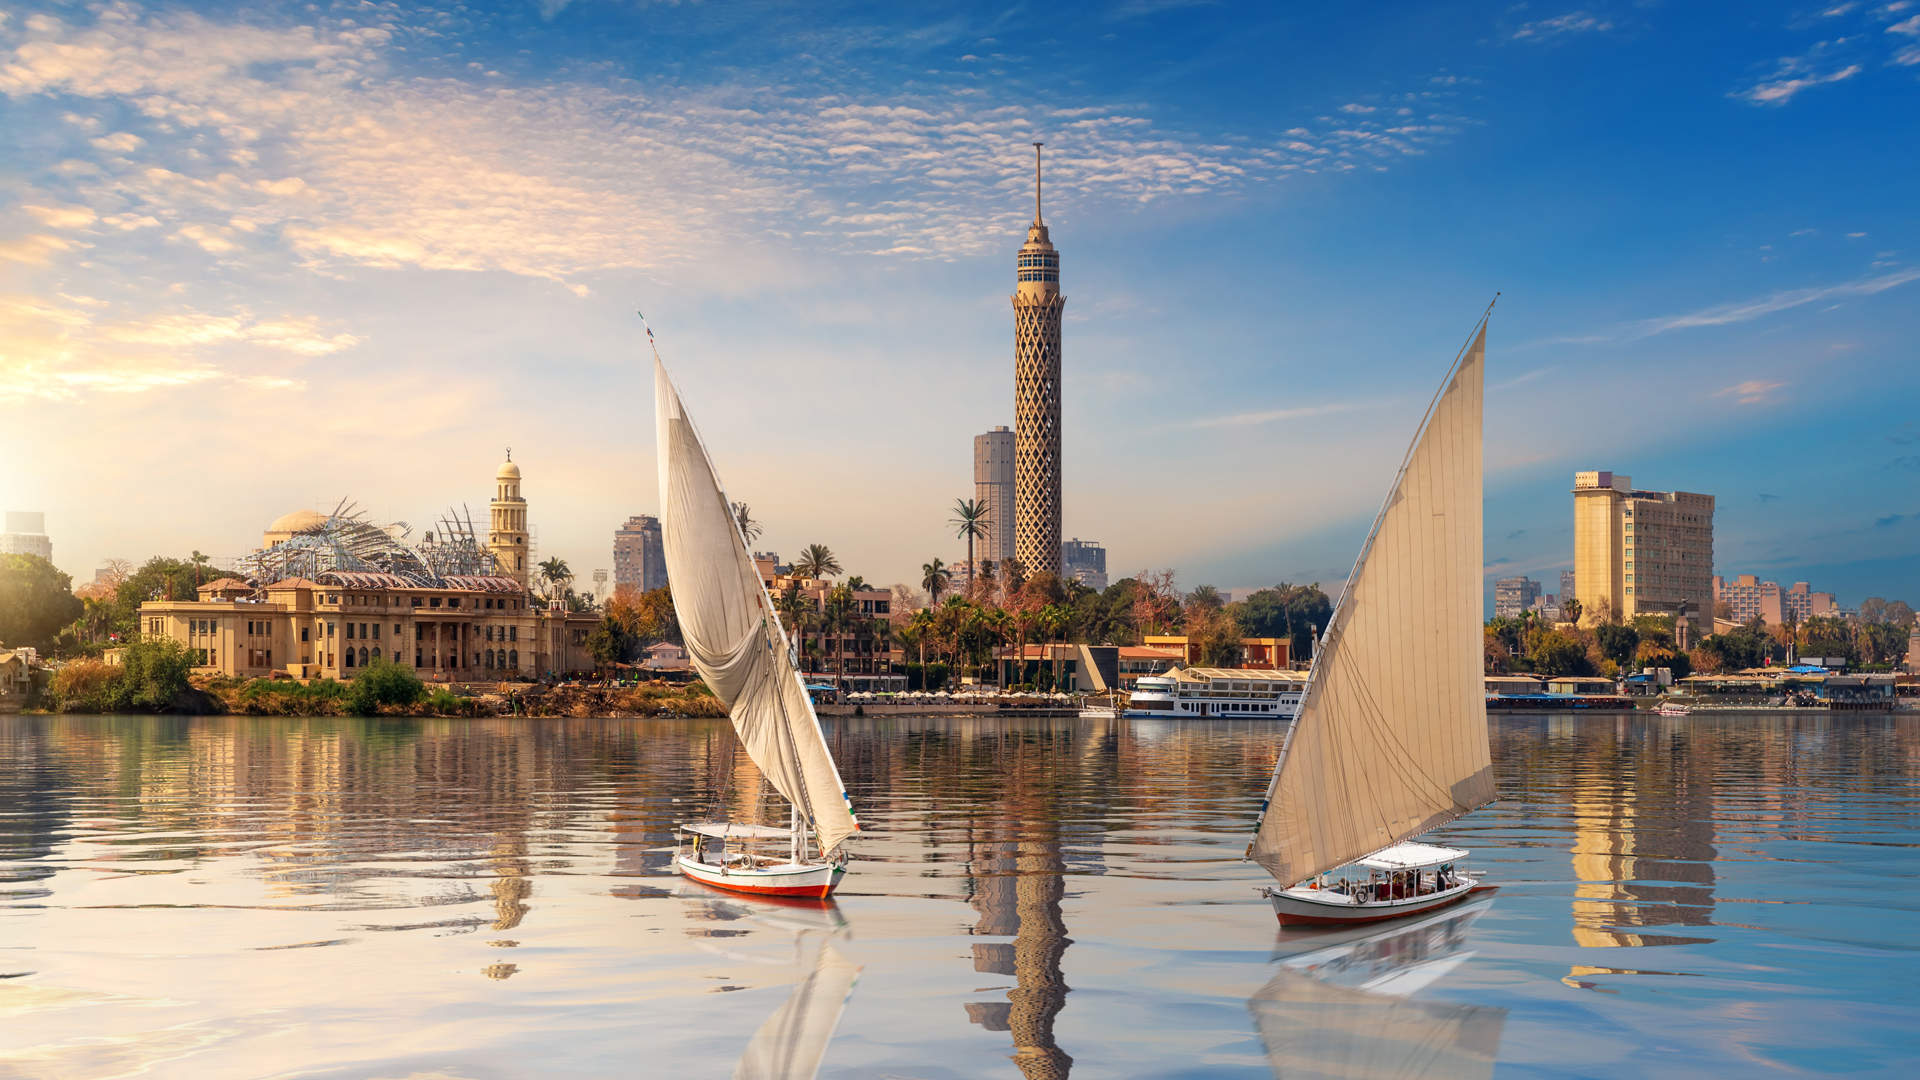 Cairo Downtown, Beautiful View Of The Nile And Sailboats, Egypt